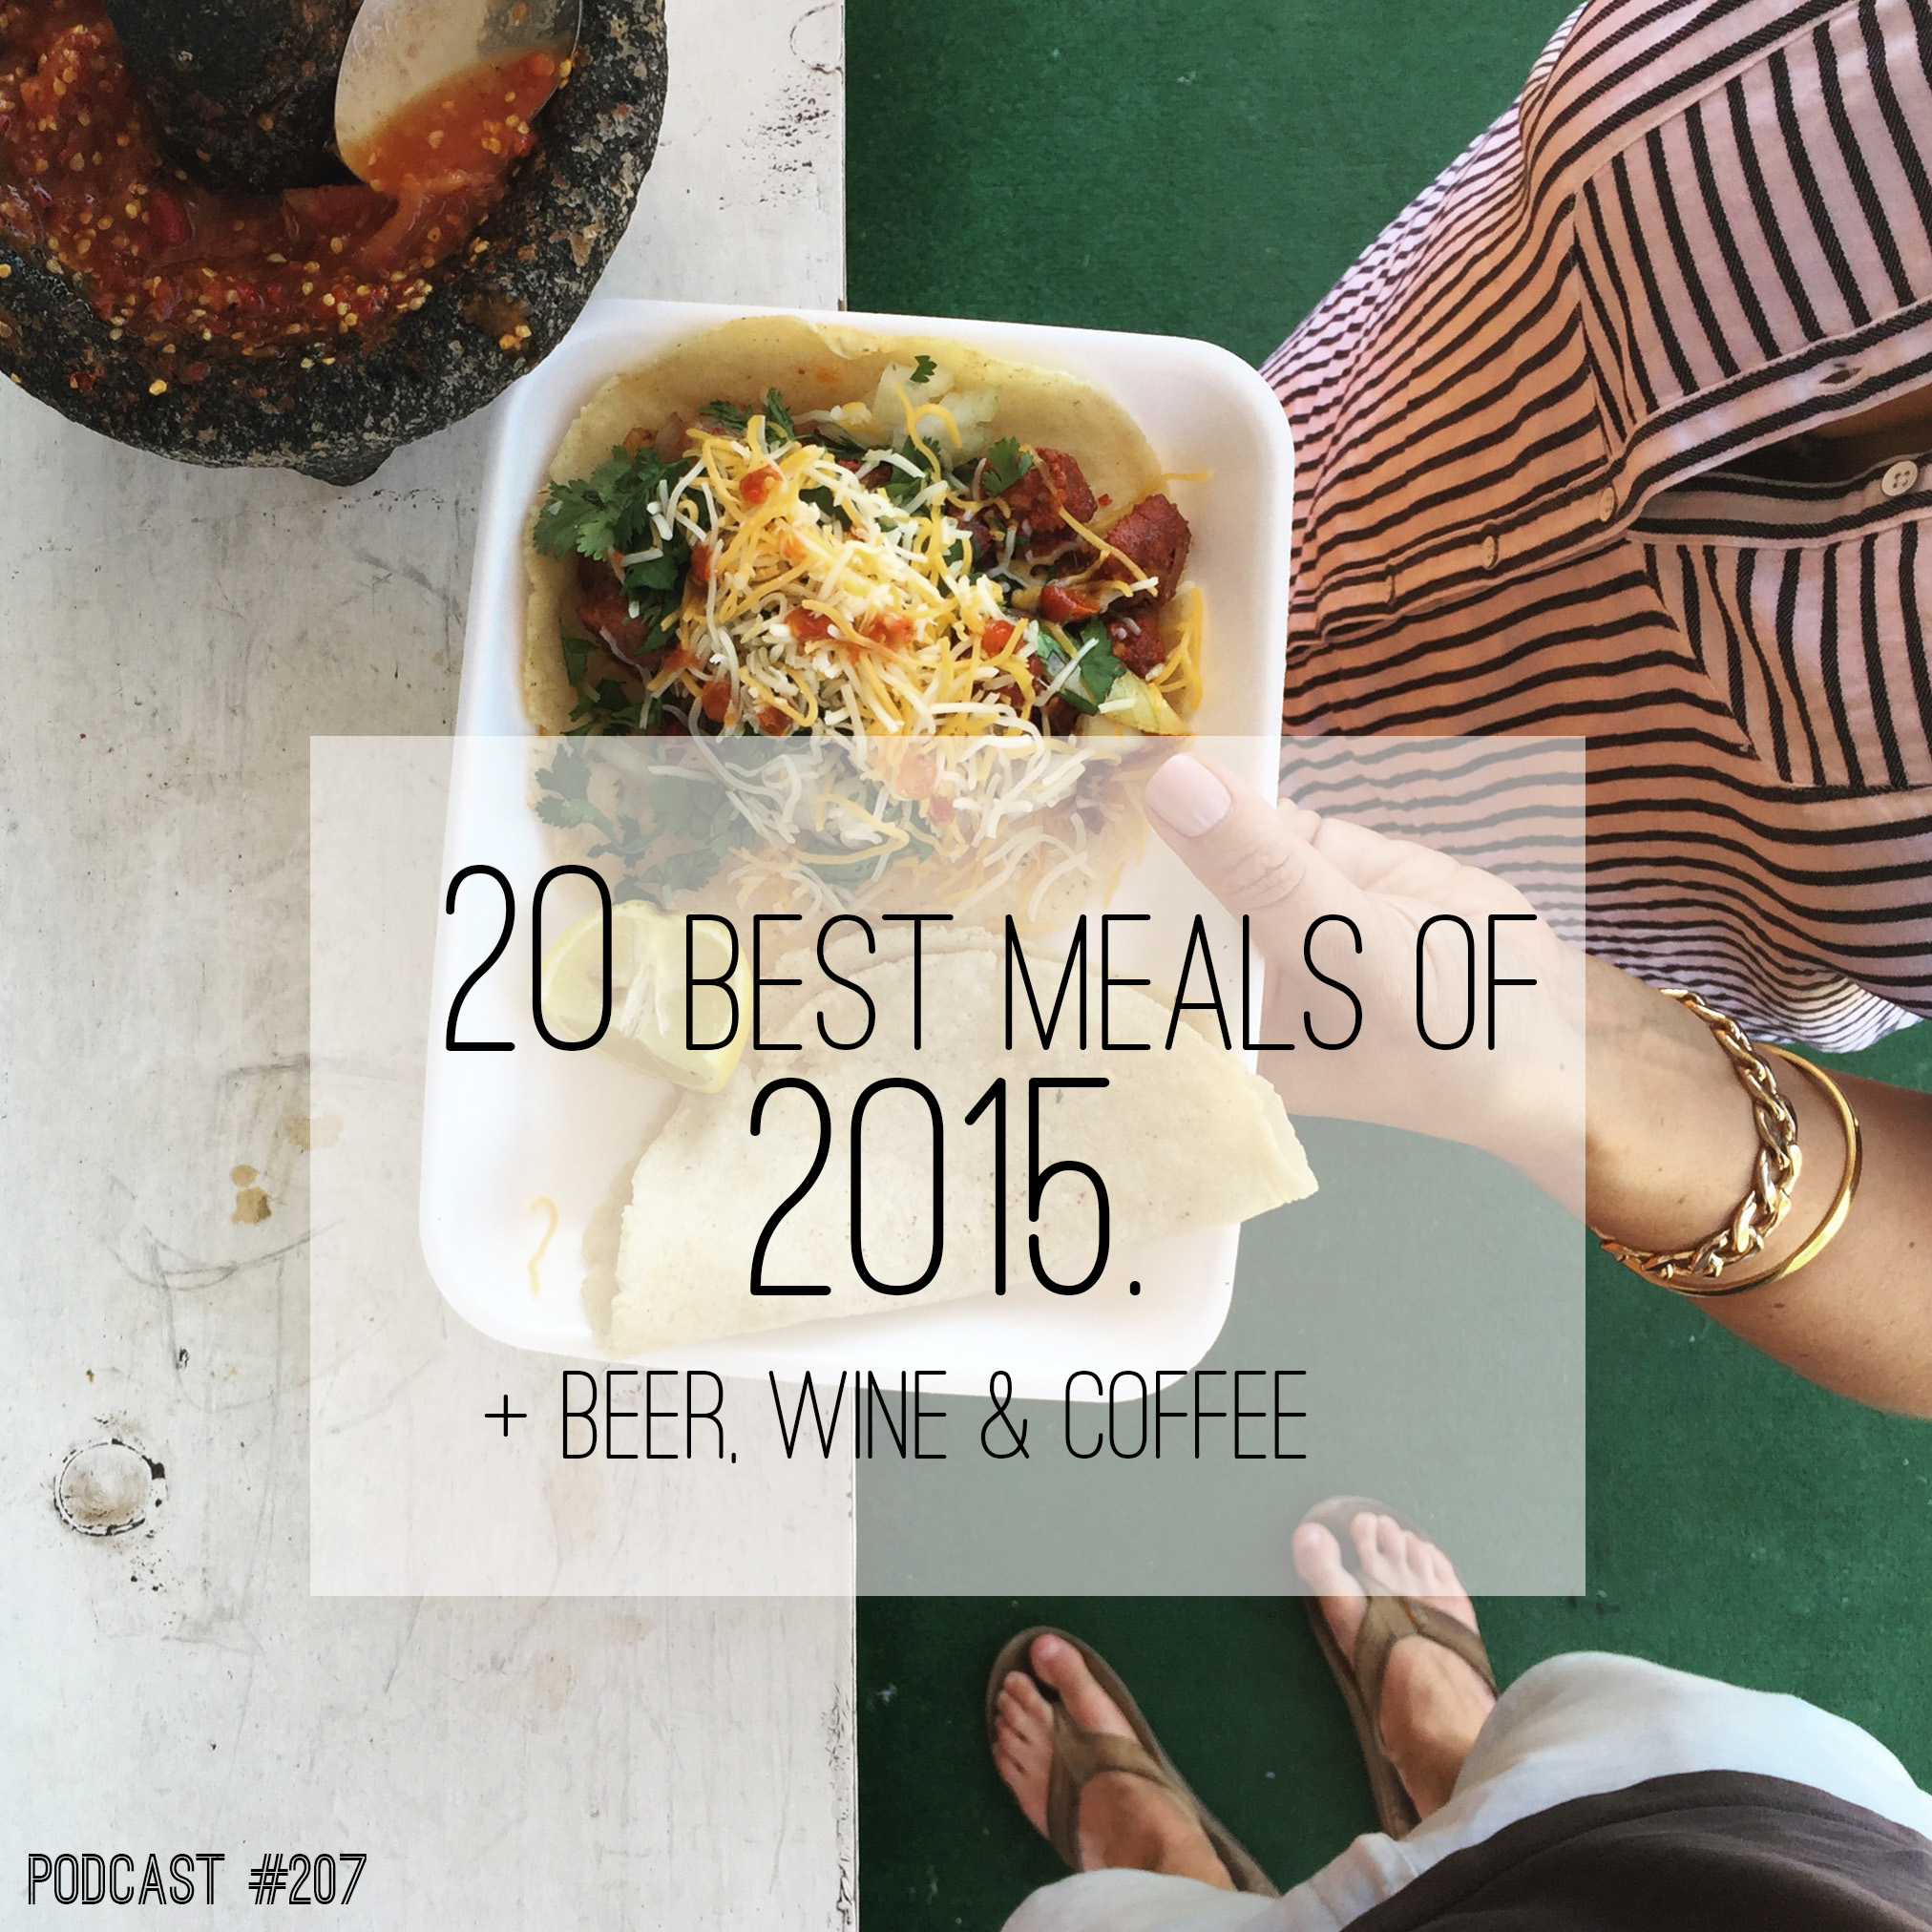 Our 20 Best Meals of 2015 (Plus Beer, Coffee, and Wine!)